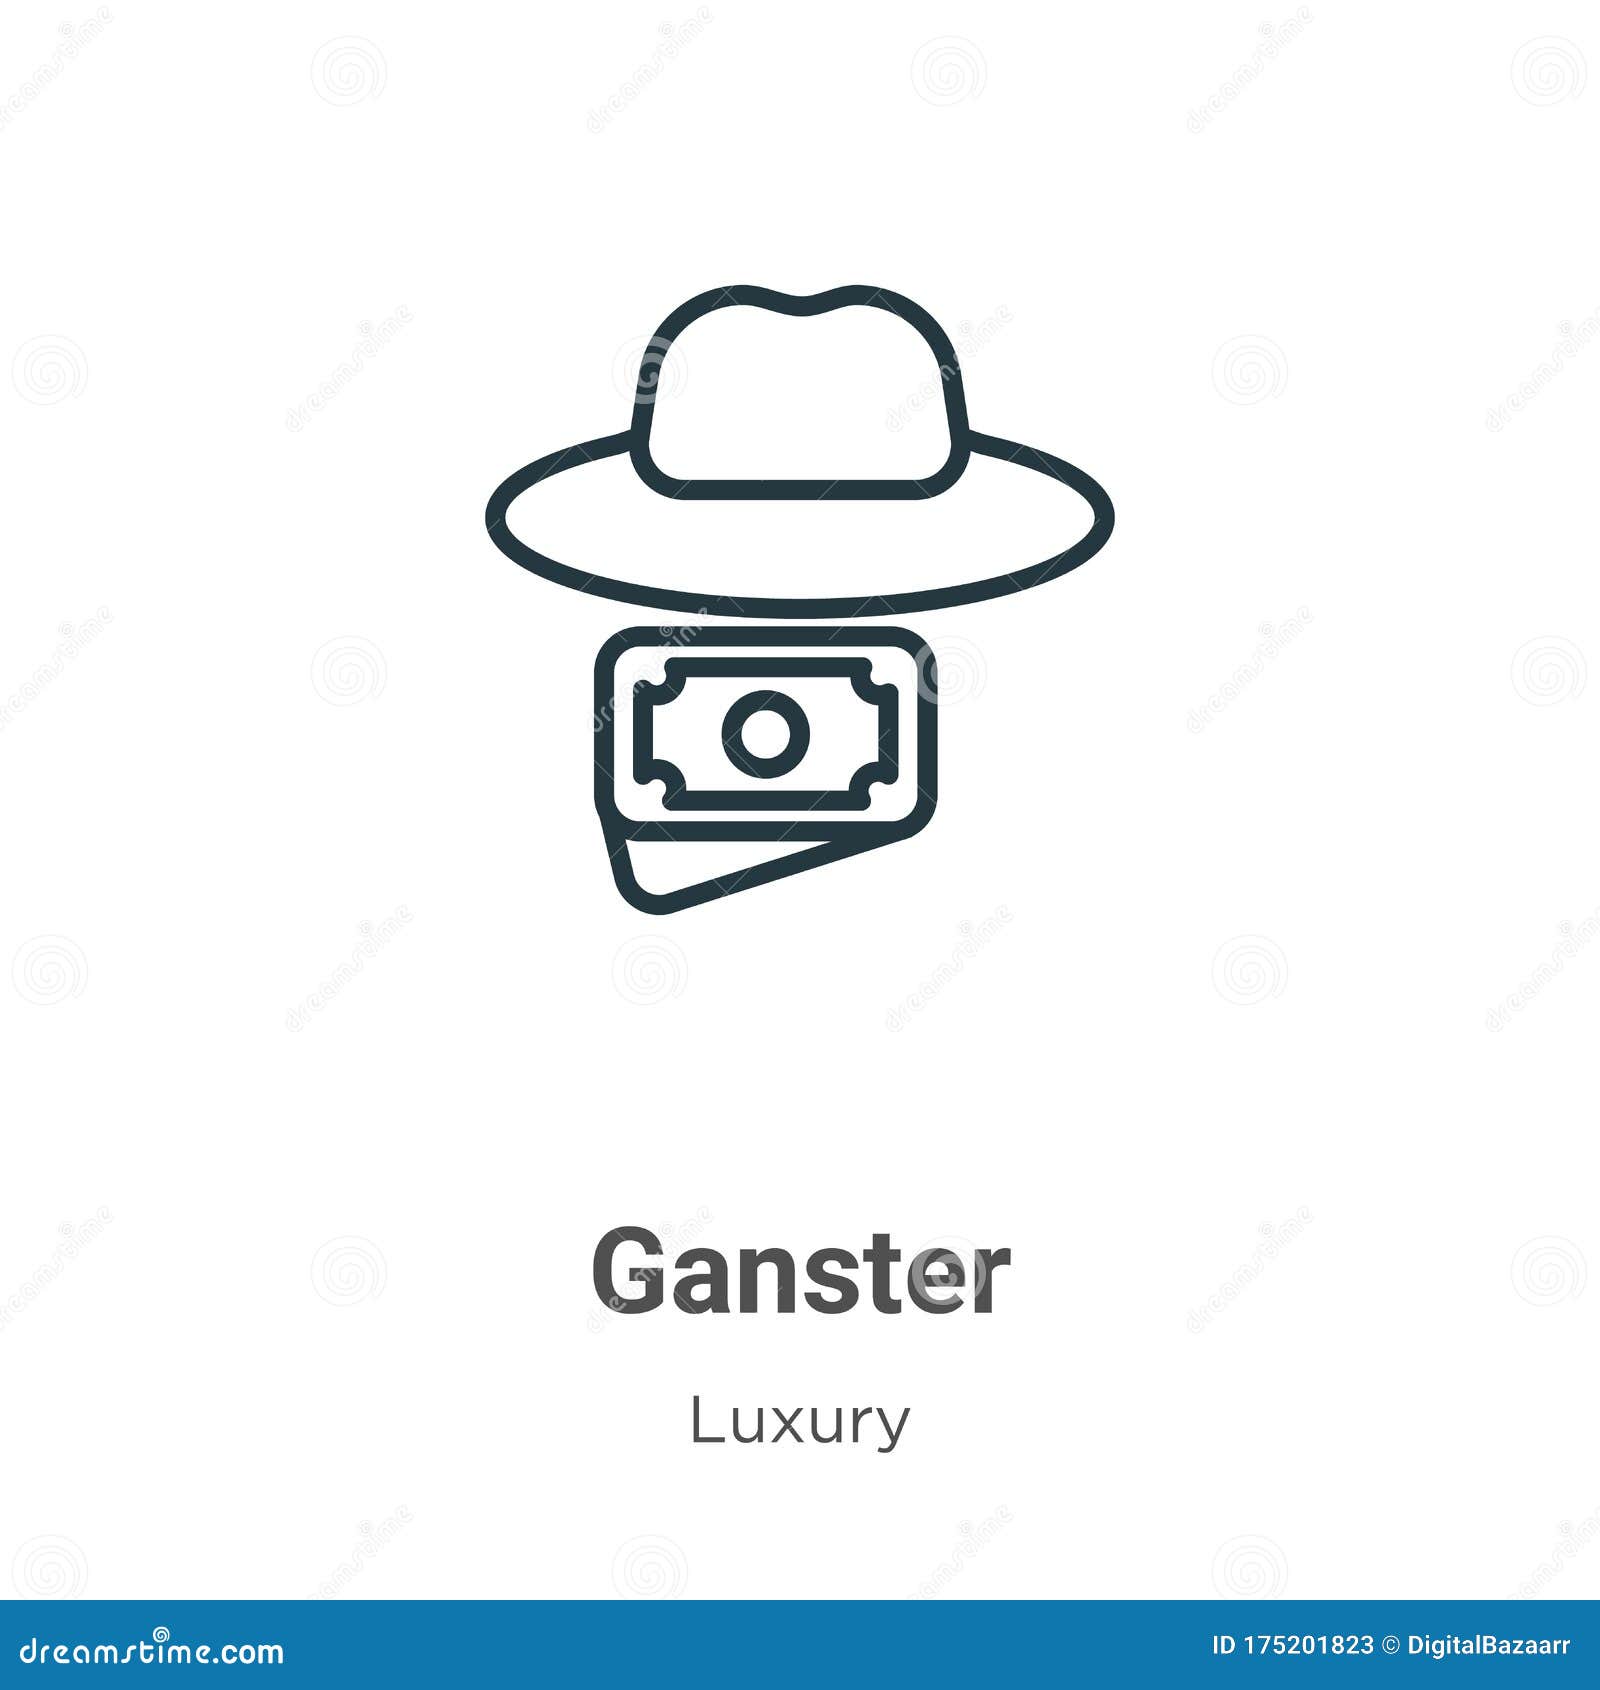 ganster outline  icon. thin line black ganster icon, flat  simple   from editable luxury concept